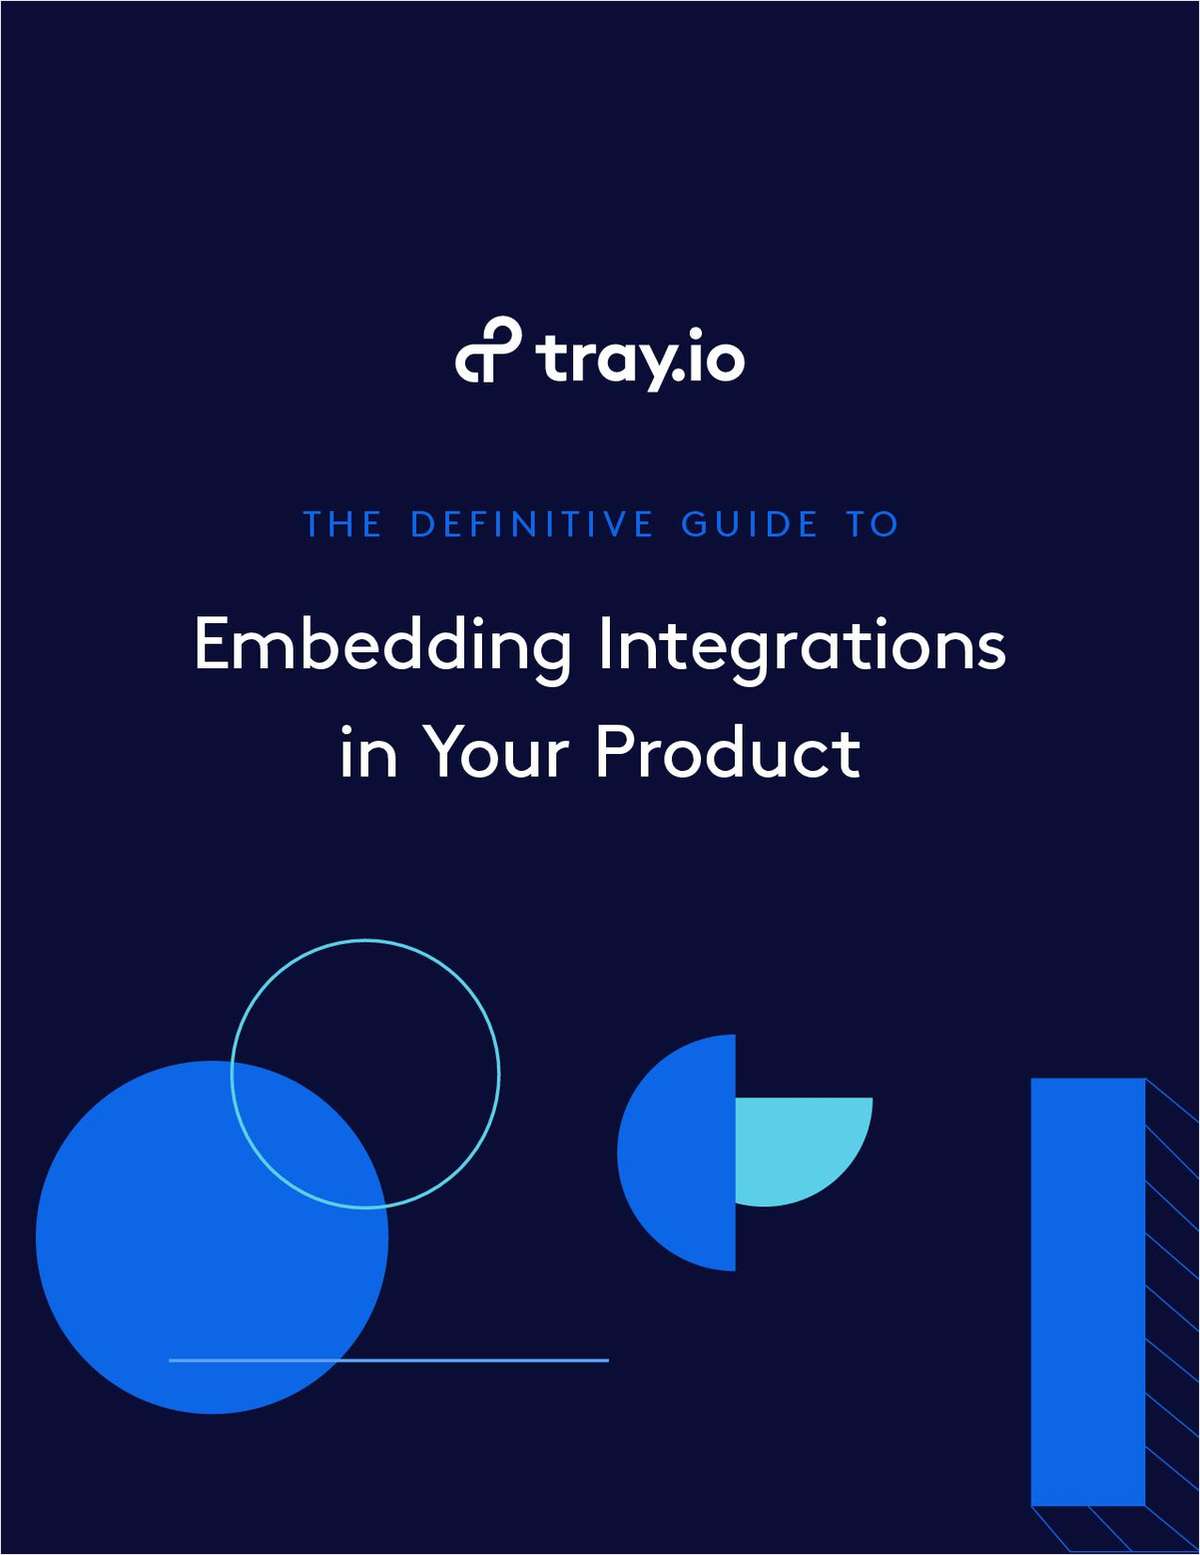 The Definitive Guide to Embedding Integrations in Your Product